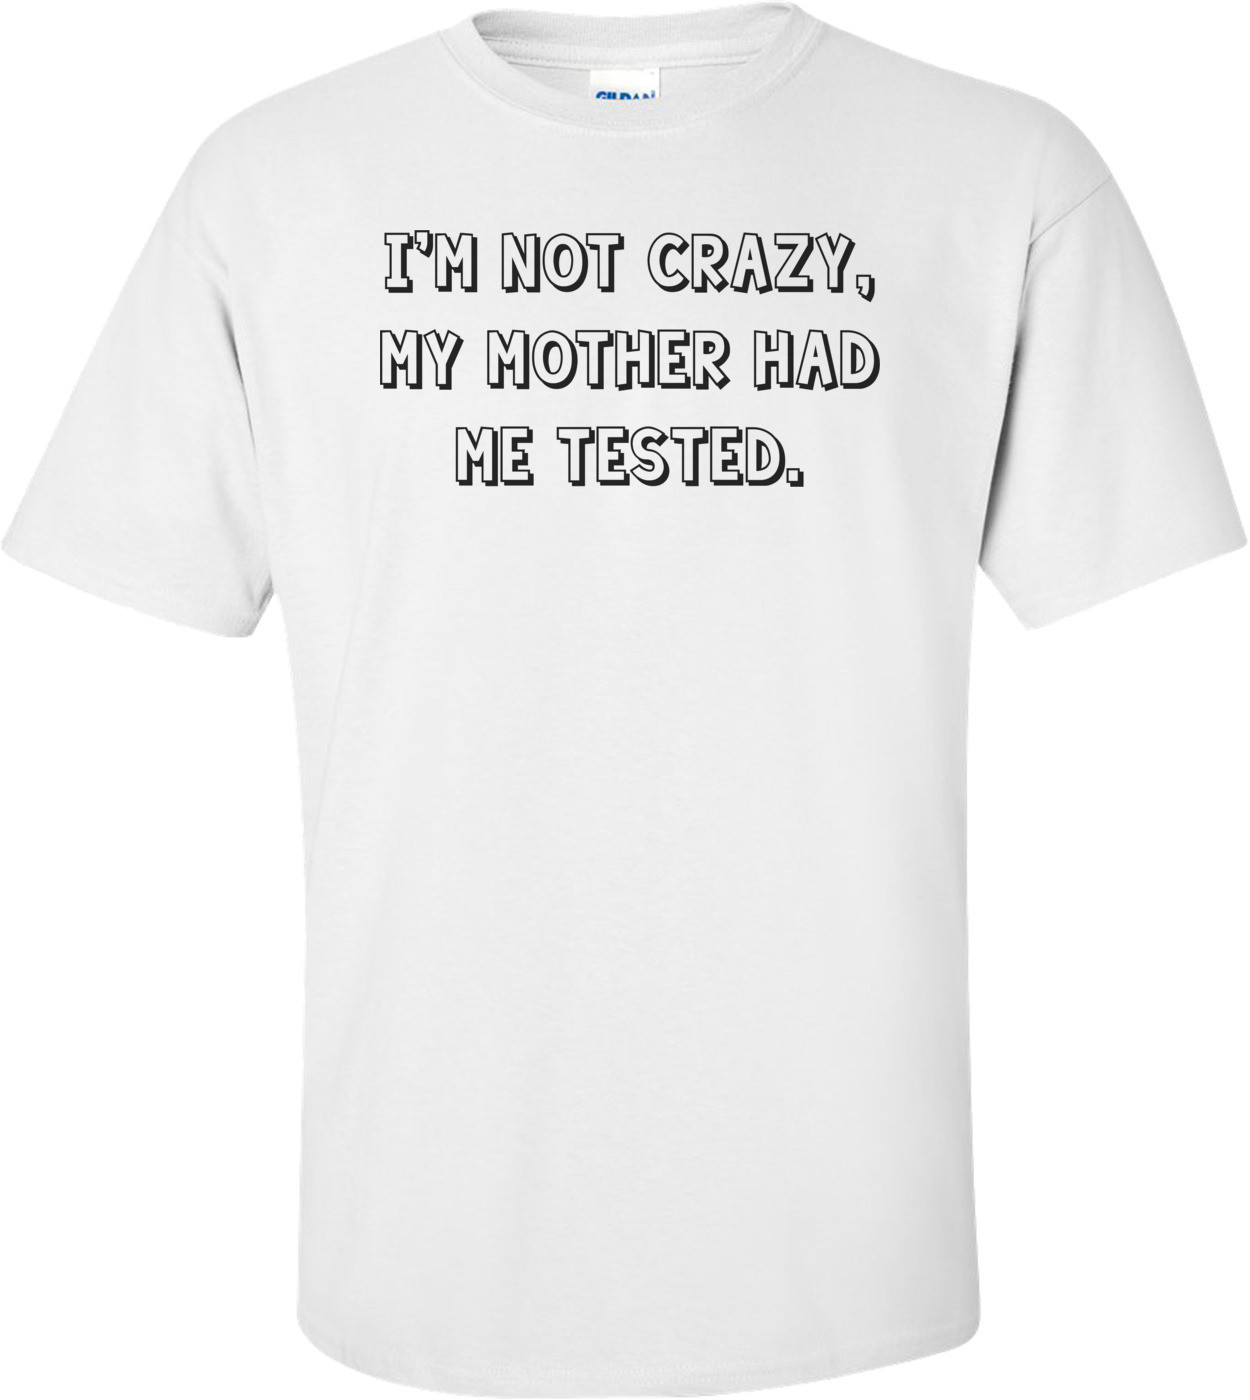 I'm not crazy, my mother had me tested. Shirt